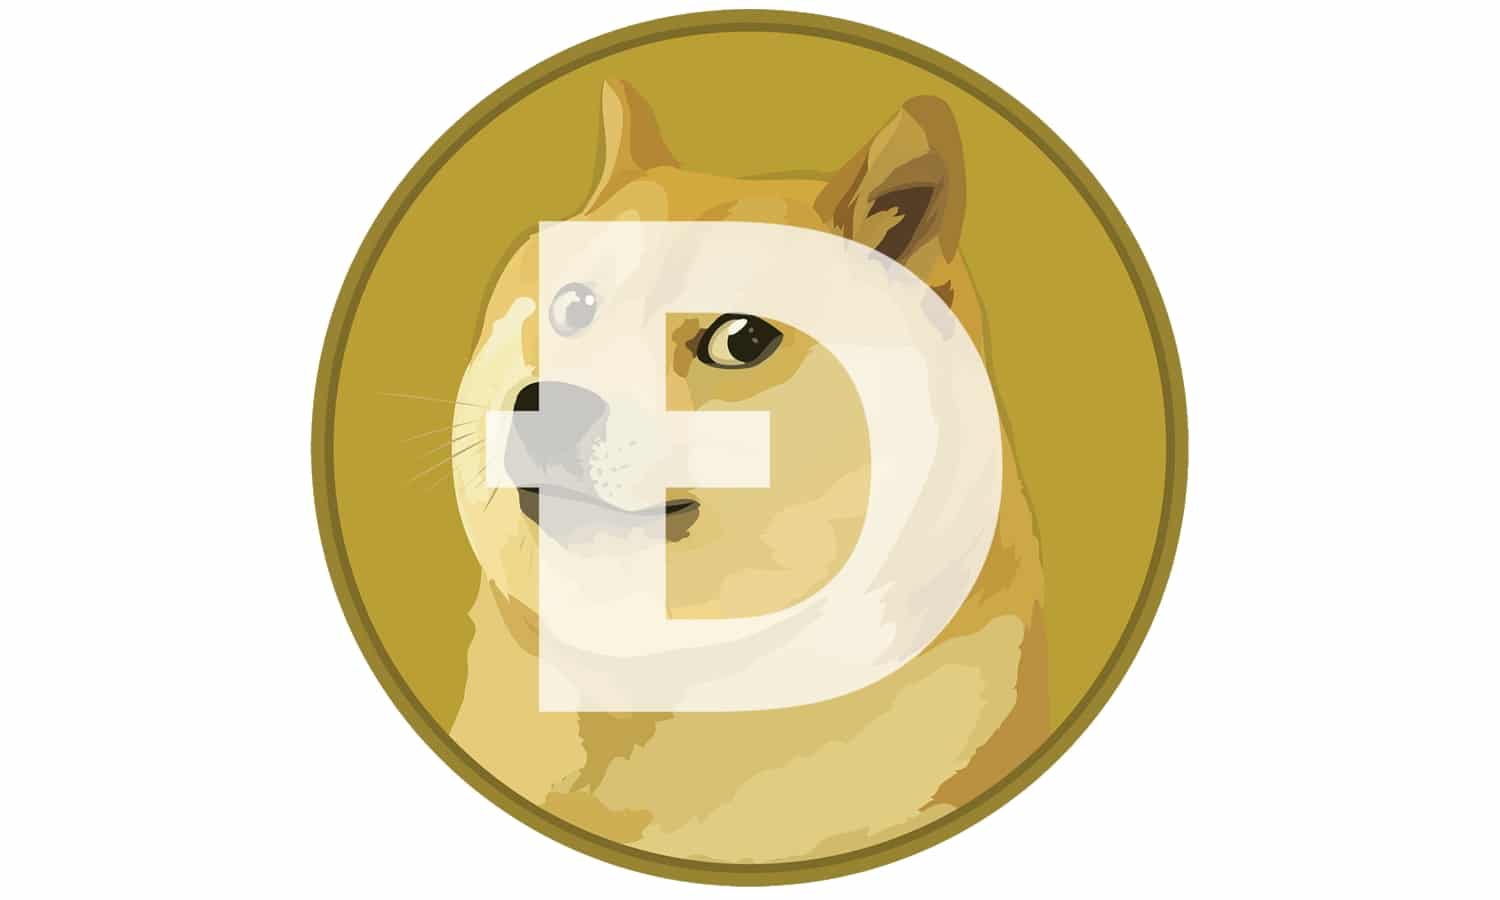 How to Mine Dogecoin [Updated 1 Day Ago] | CoinMarketCap